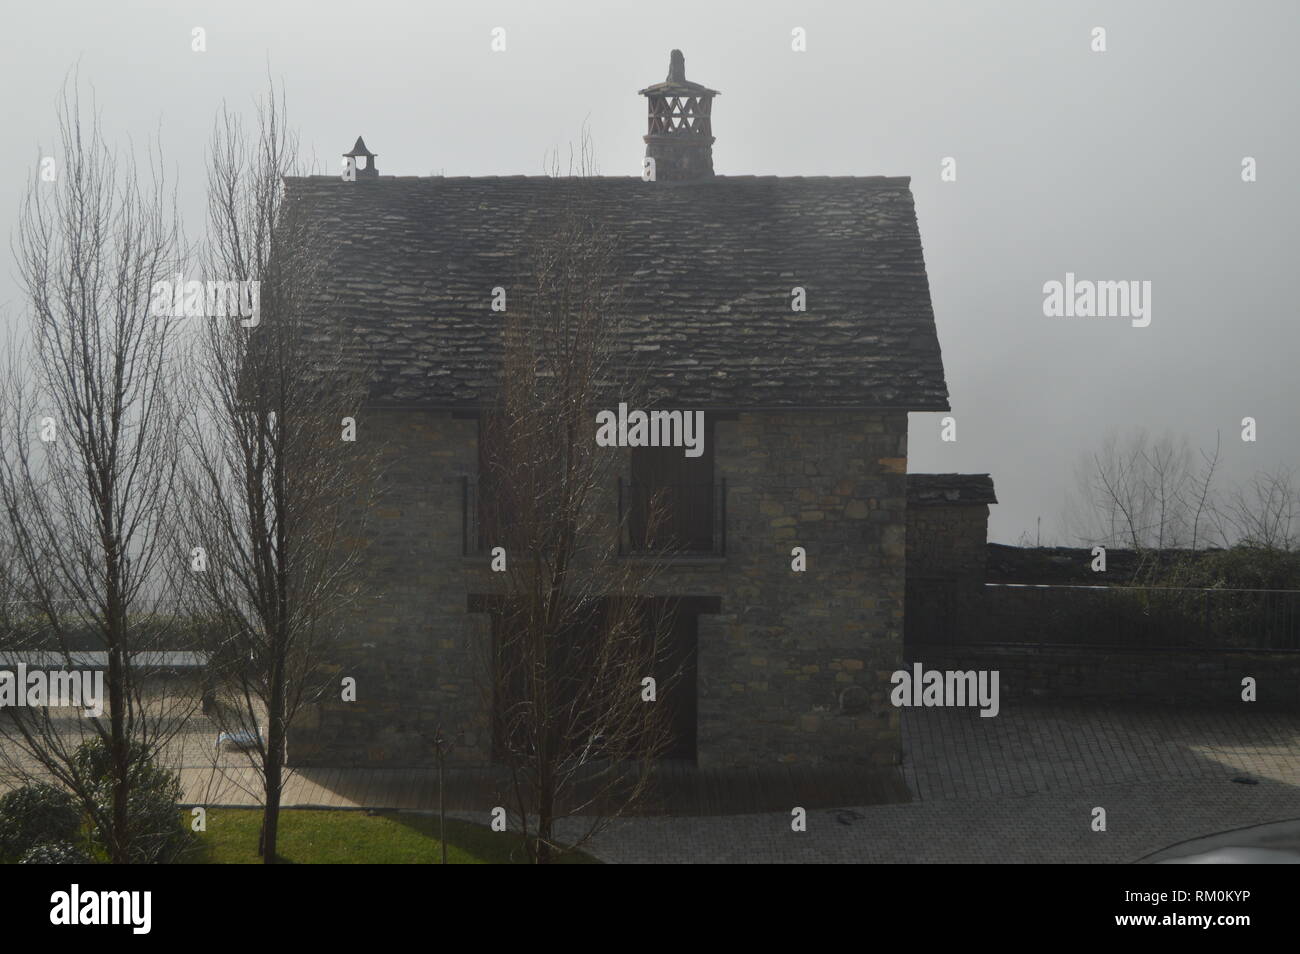 Beautiful Medieval Style Stone House With Black Slate Roofs In Ainsa Village. Travel, Landscapes, Architecture. December 26, 2014. Ainsa, Huesca, Arag Stock Photo